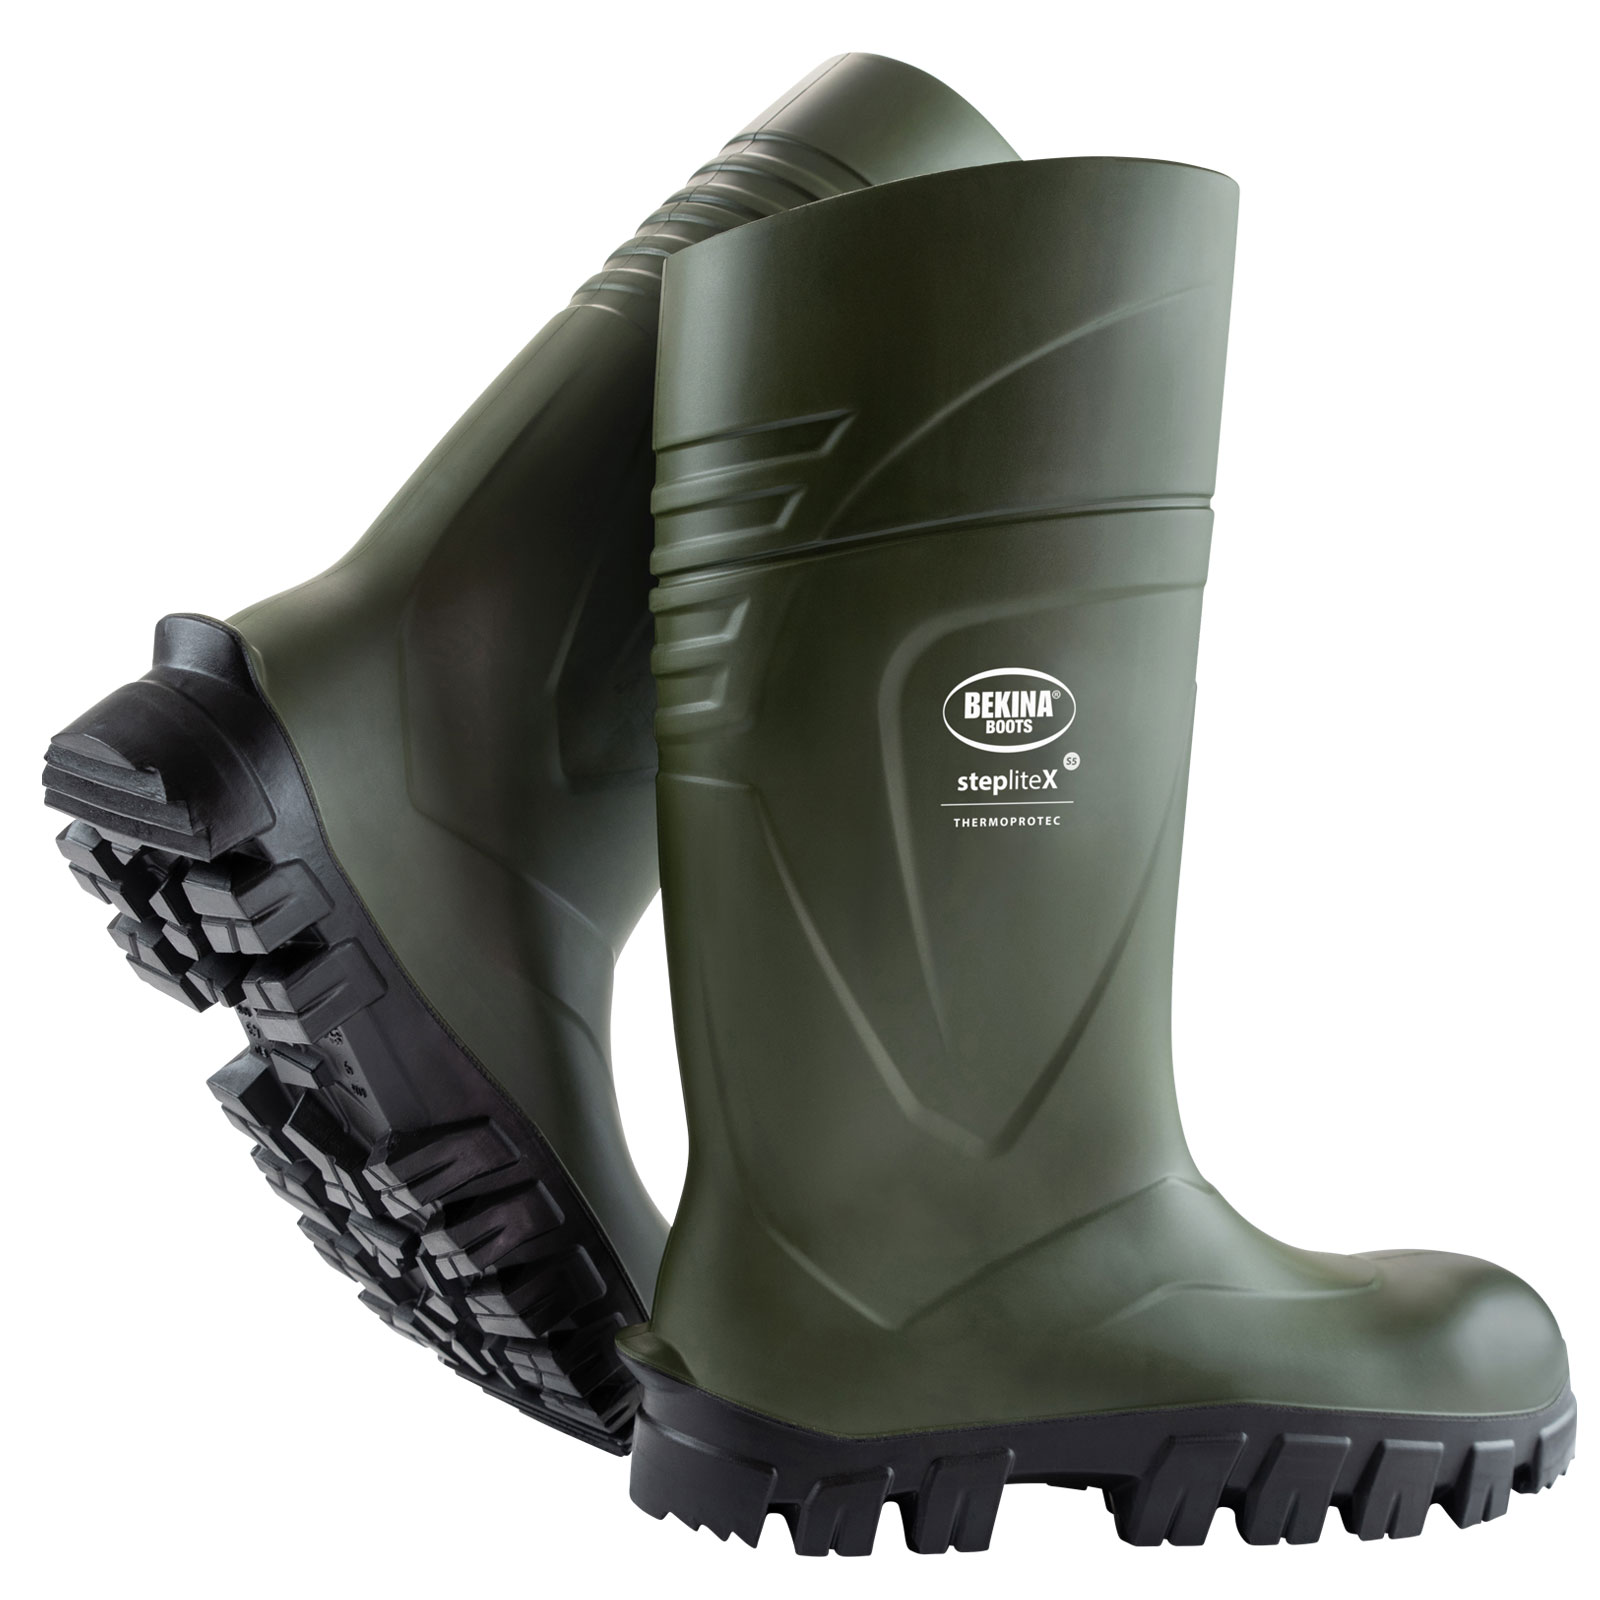 Bekina StepliteX ThermoProtect XCi s5 winter safety boots 37